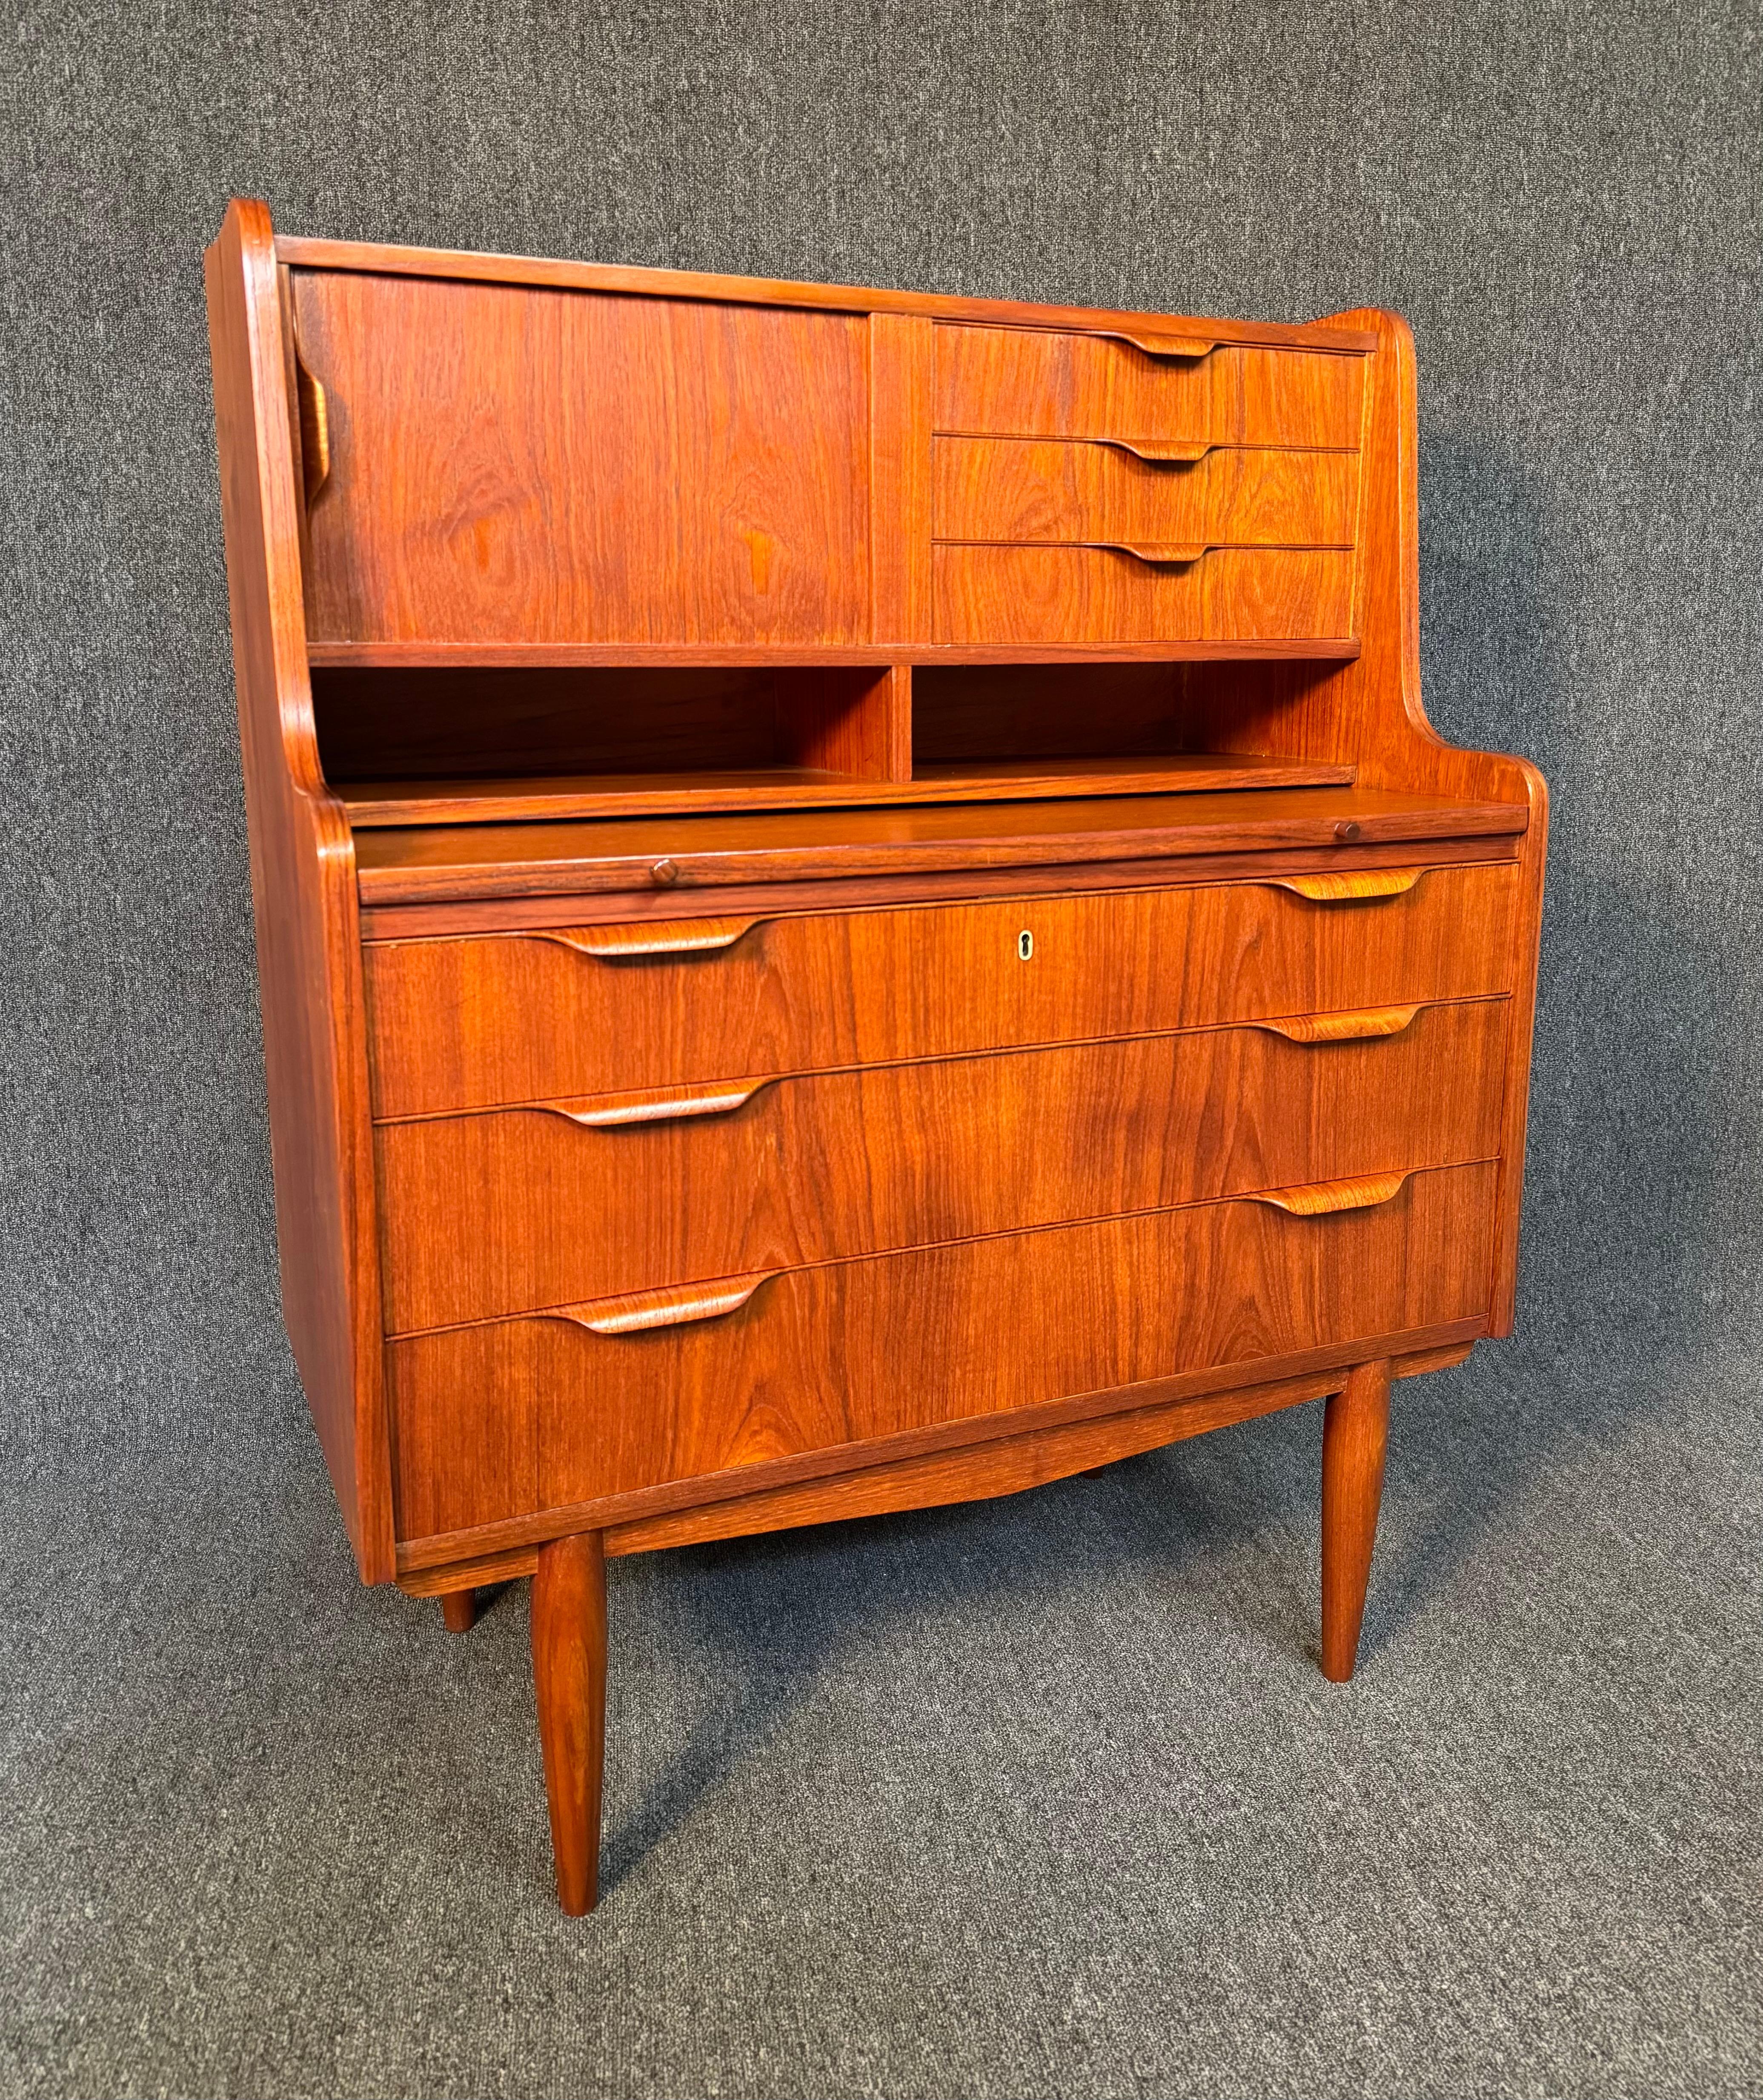 Here is a beautiful Scandinavian modern secretary desk in teak wood manufactured in Denmark in the 1960's.
This exquisite piece, recently imported from Europe to California before its refinishing, features a vibrant wood grain, multiple storage